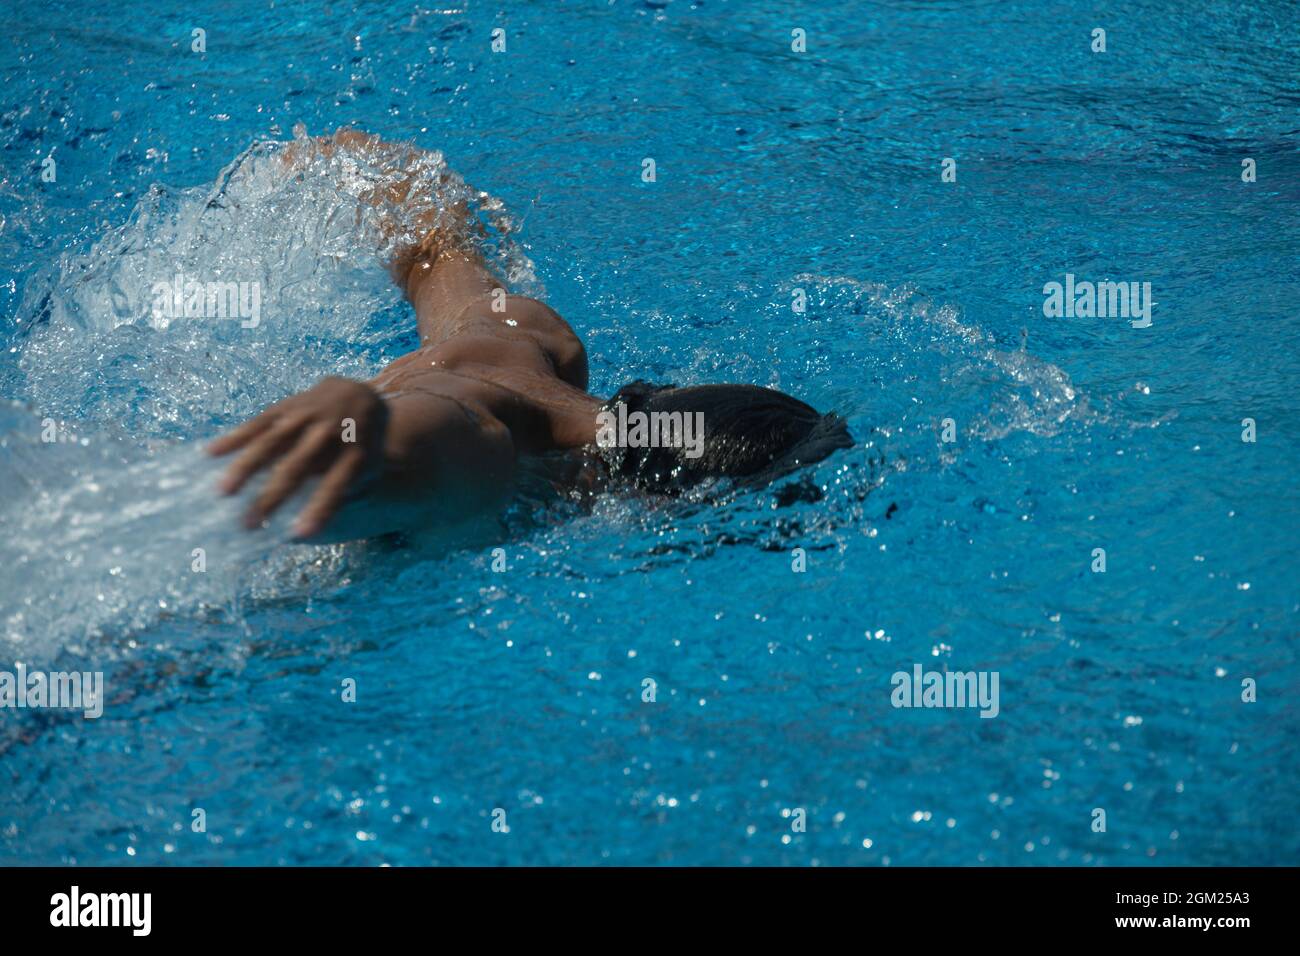 detail of a young man in swimming trunks swimming with his arms in a swimming pool Stock Photo